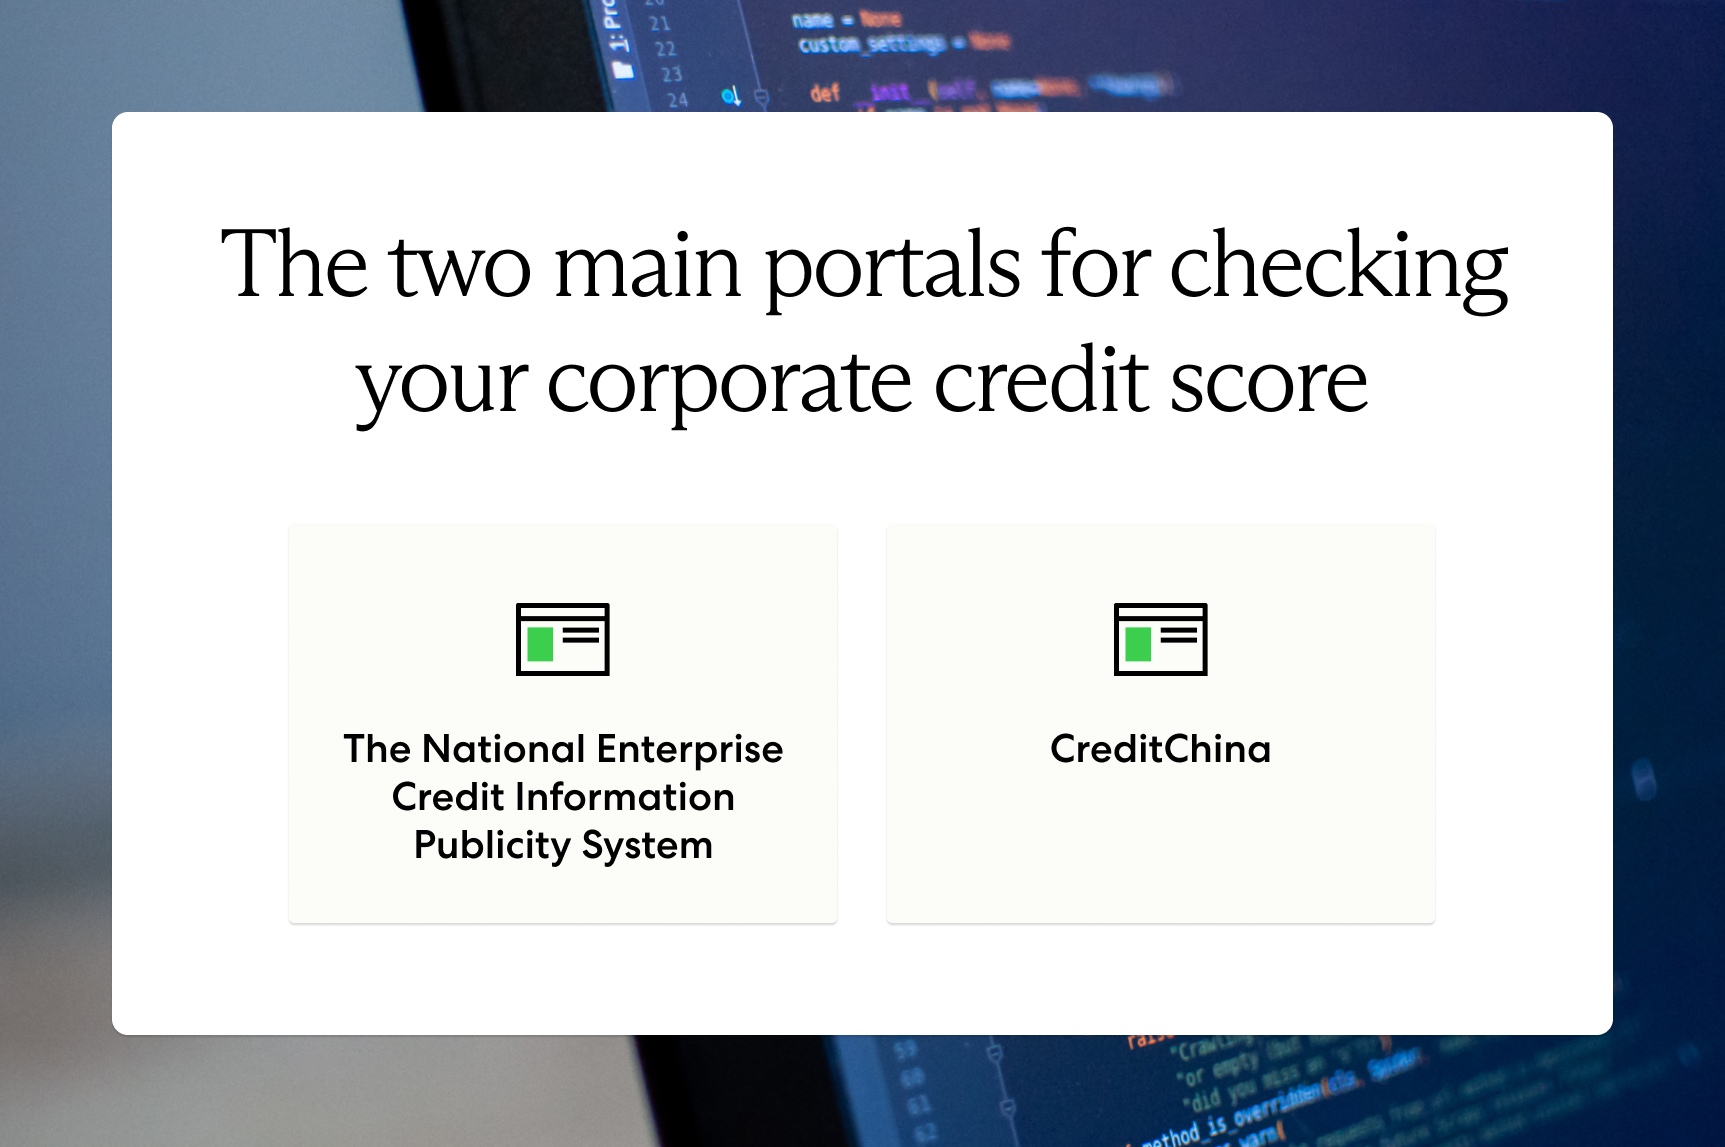 The two main portals Chinese businesses use to check their corporate social credit score are CreditChina and NECIPS